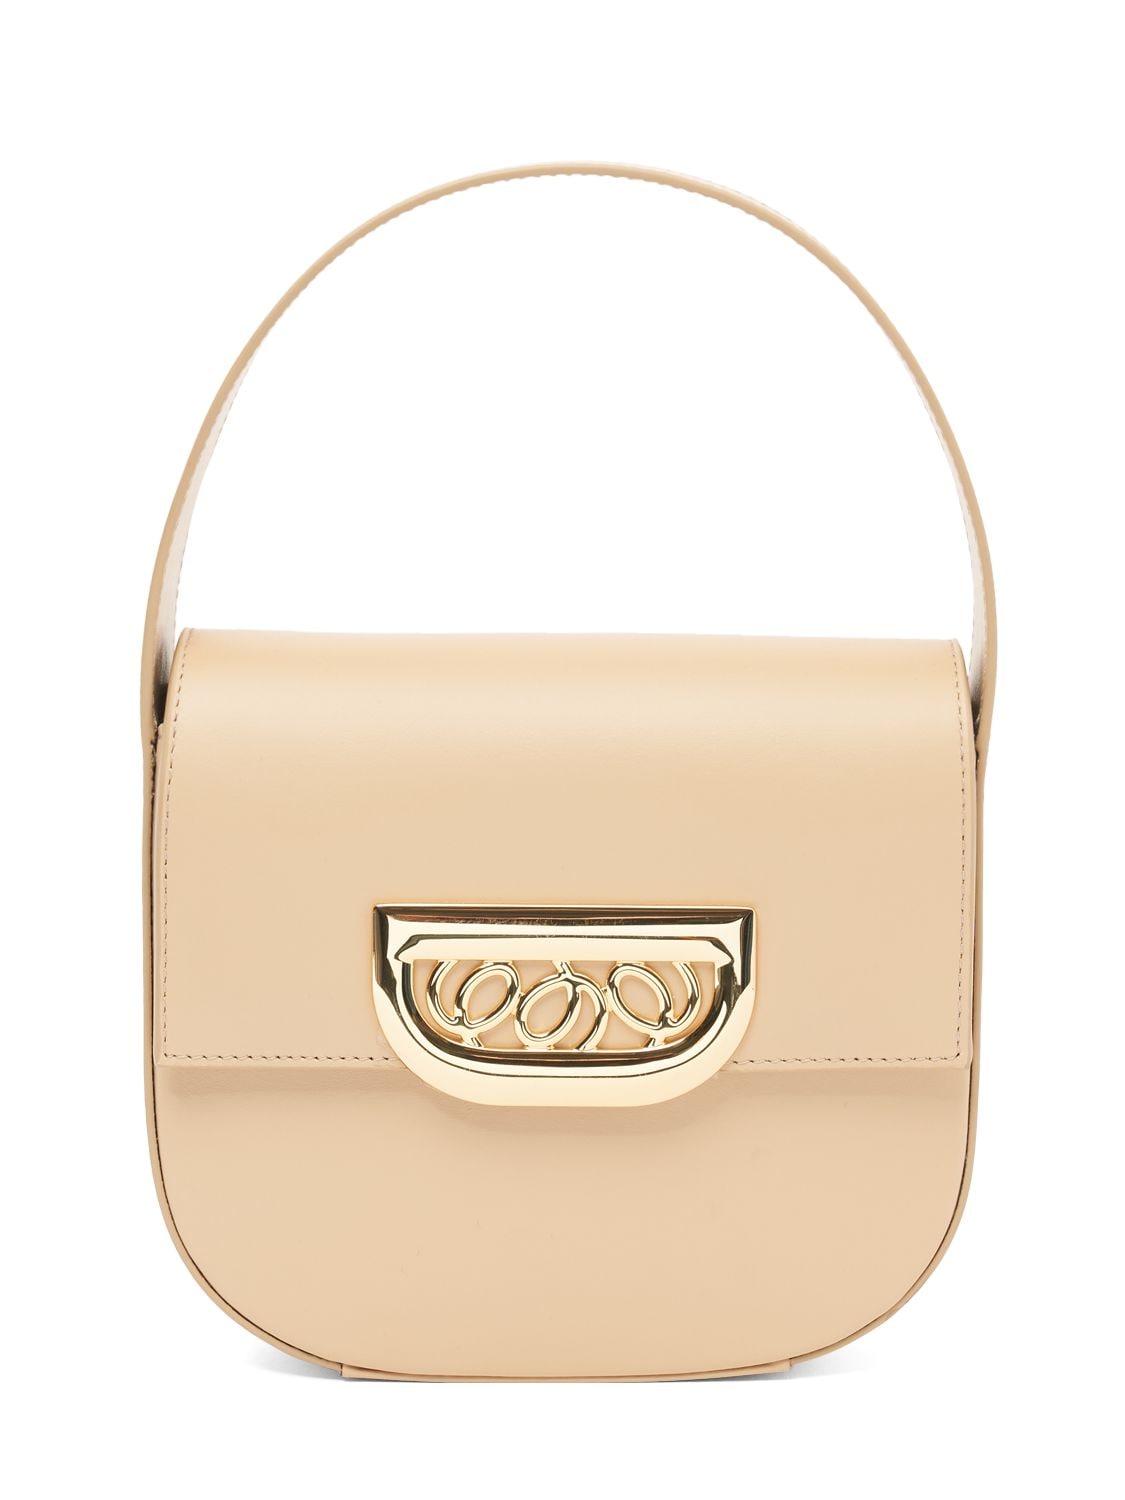 D'estree Small Martin Leather Top Handle Bag In Beige